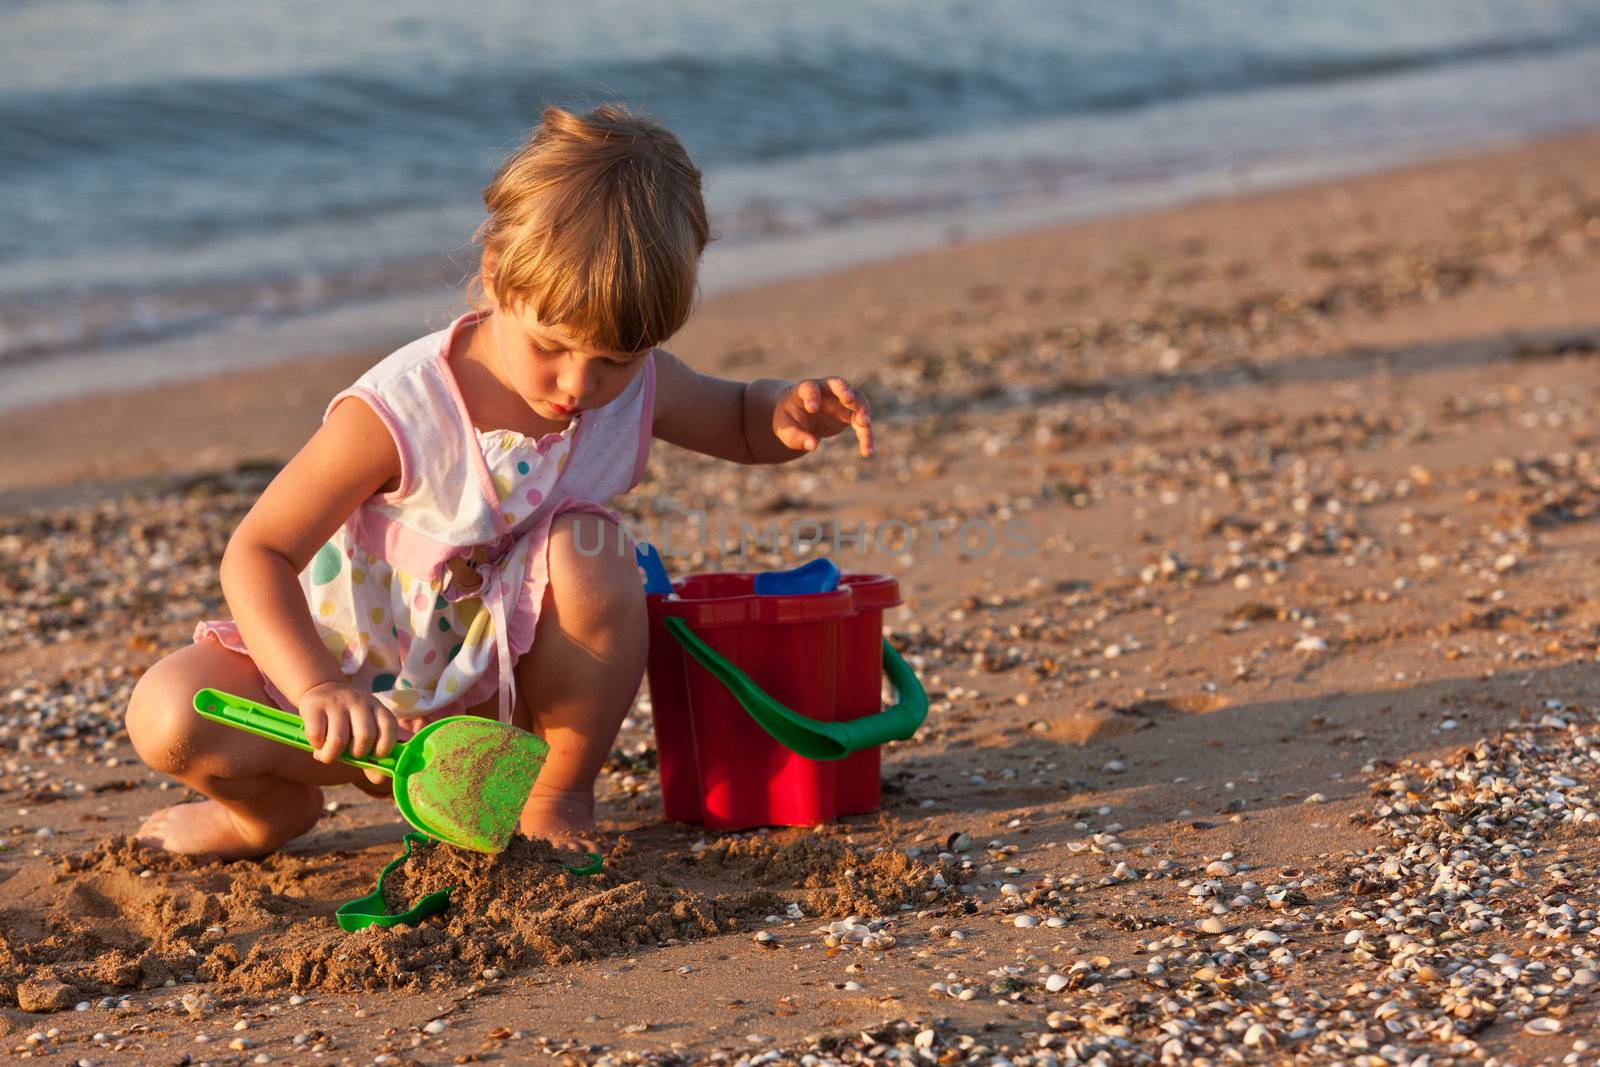 people series: little girl on the beach play with toy